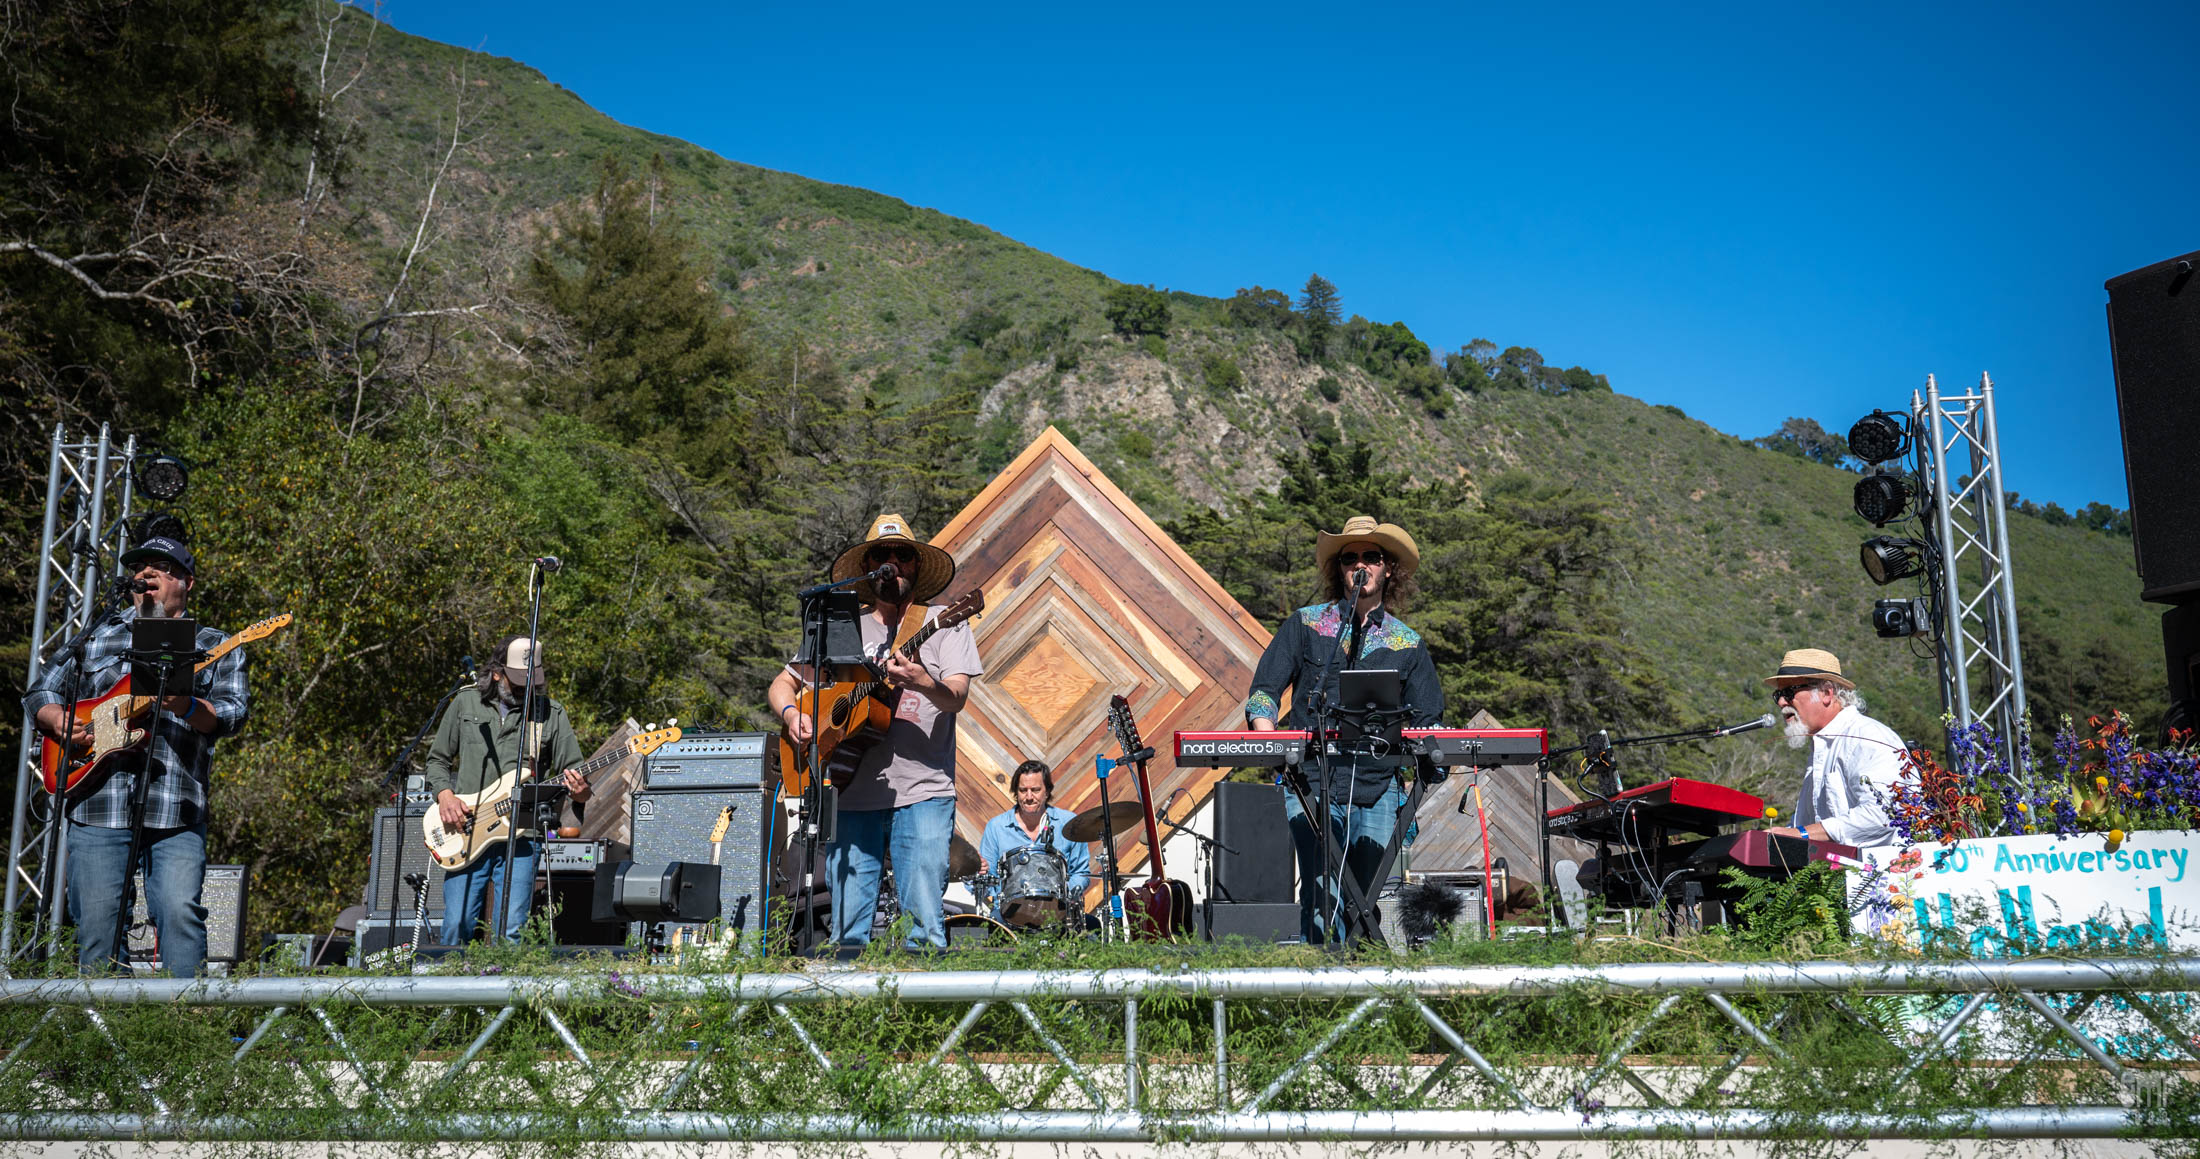 2023.5.20 HIPNIC XIV - BEACH BOYS HOLLAND 50TH TRIBUTE SET at Fernwood, Campground and Resort Big Sur CA. photo by emi